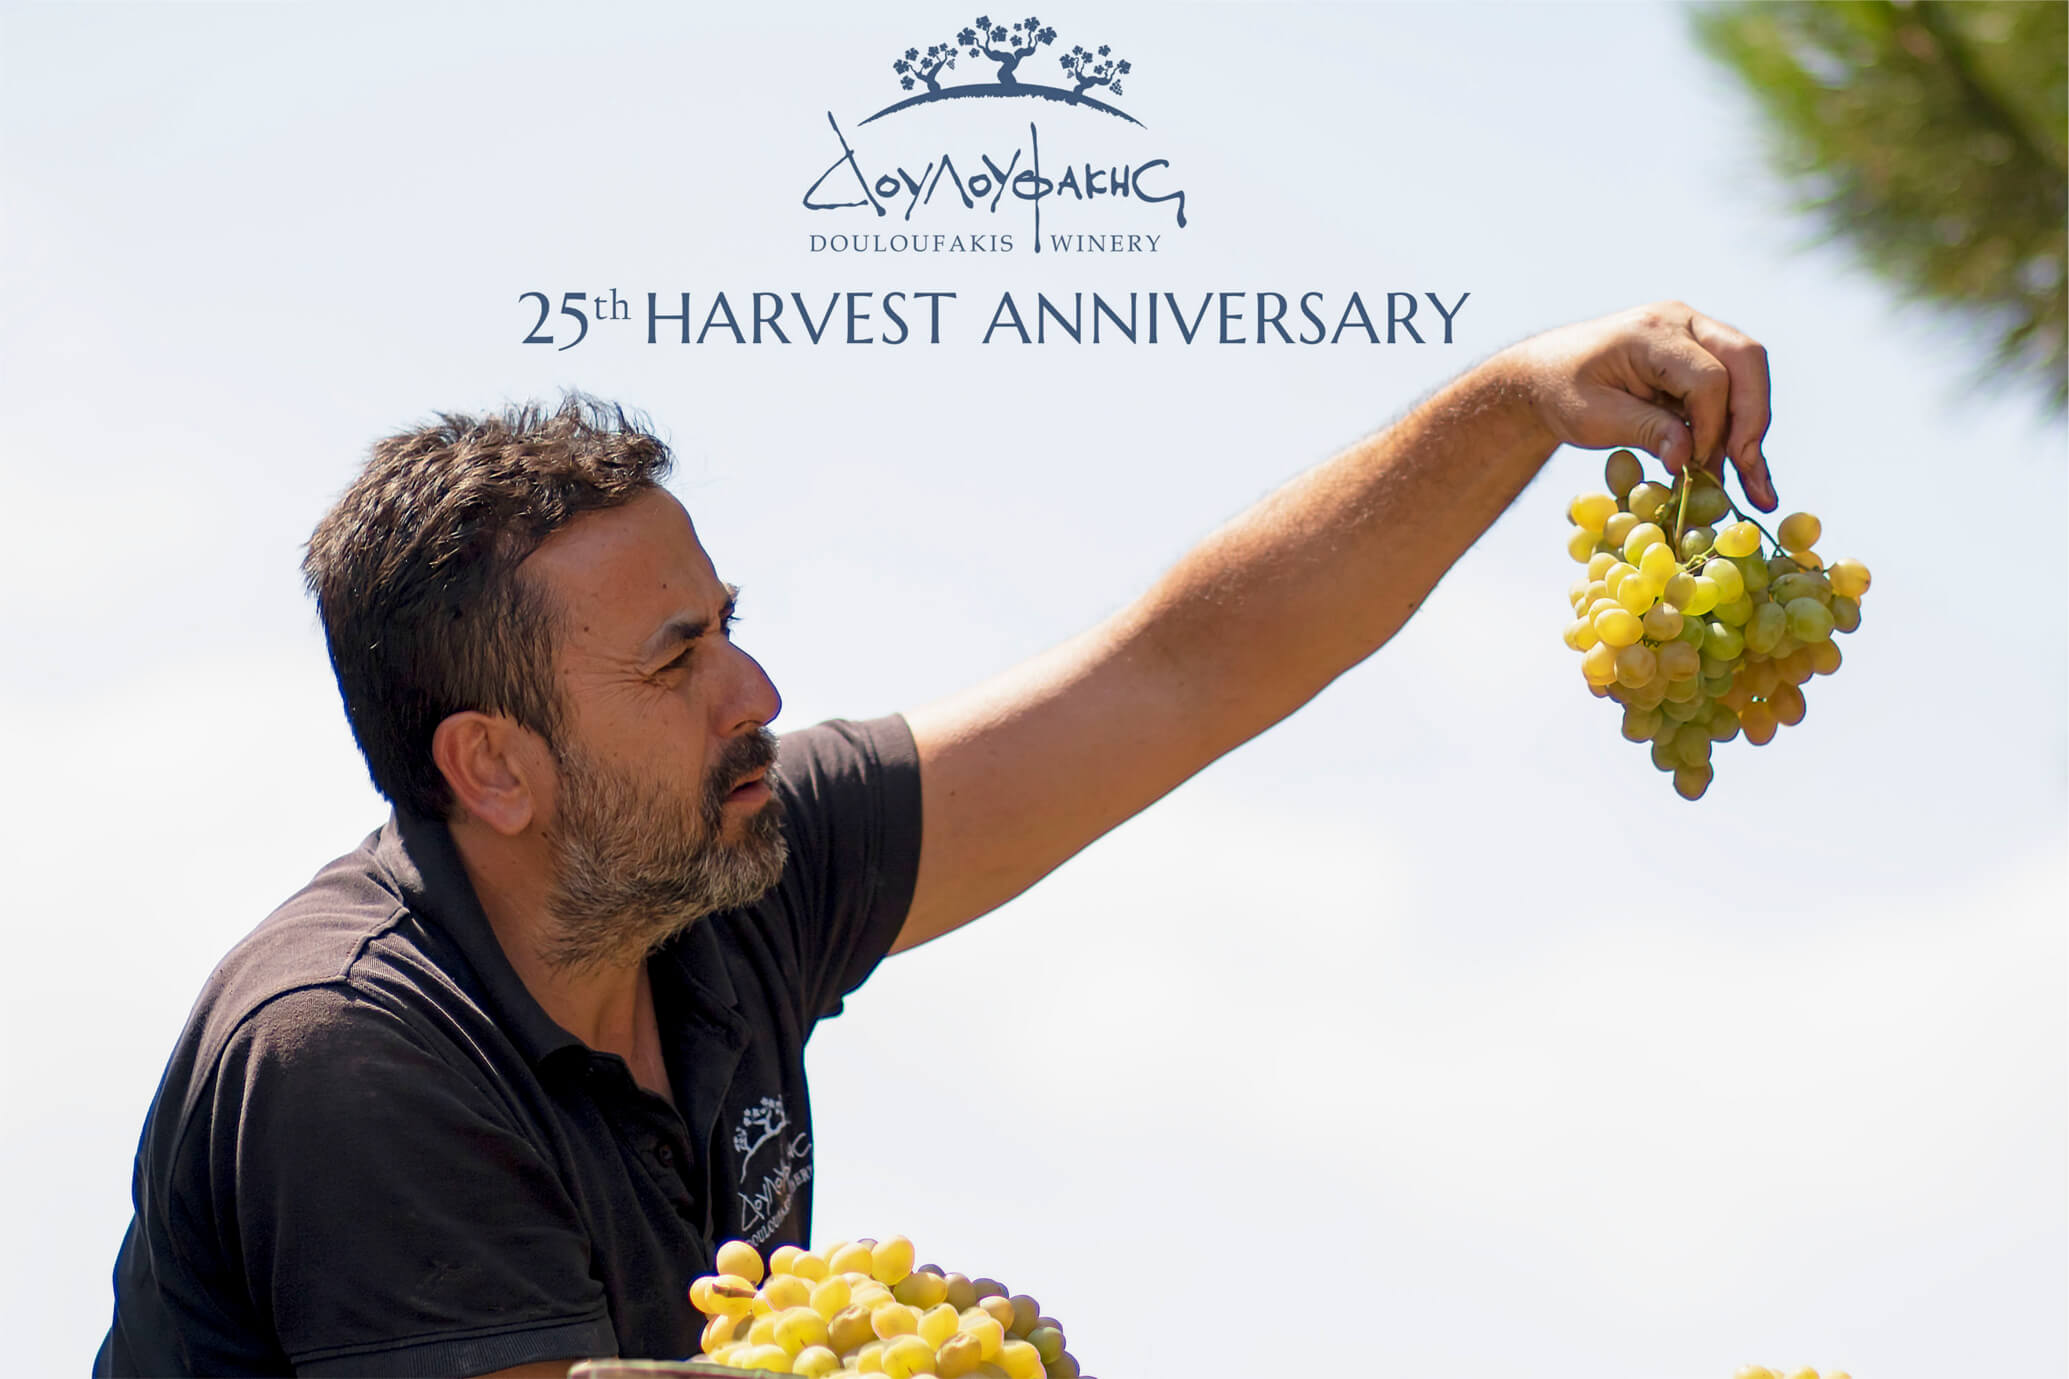 Douloufakis Winery: 25 Harvest seasons - 25 challenges